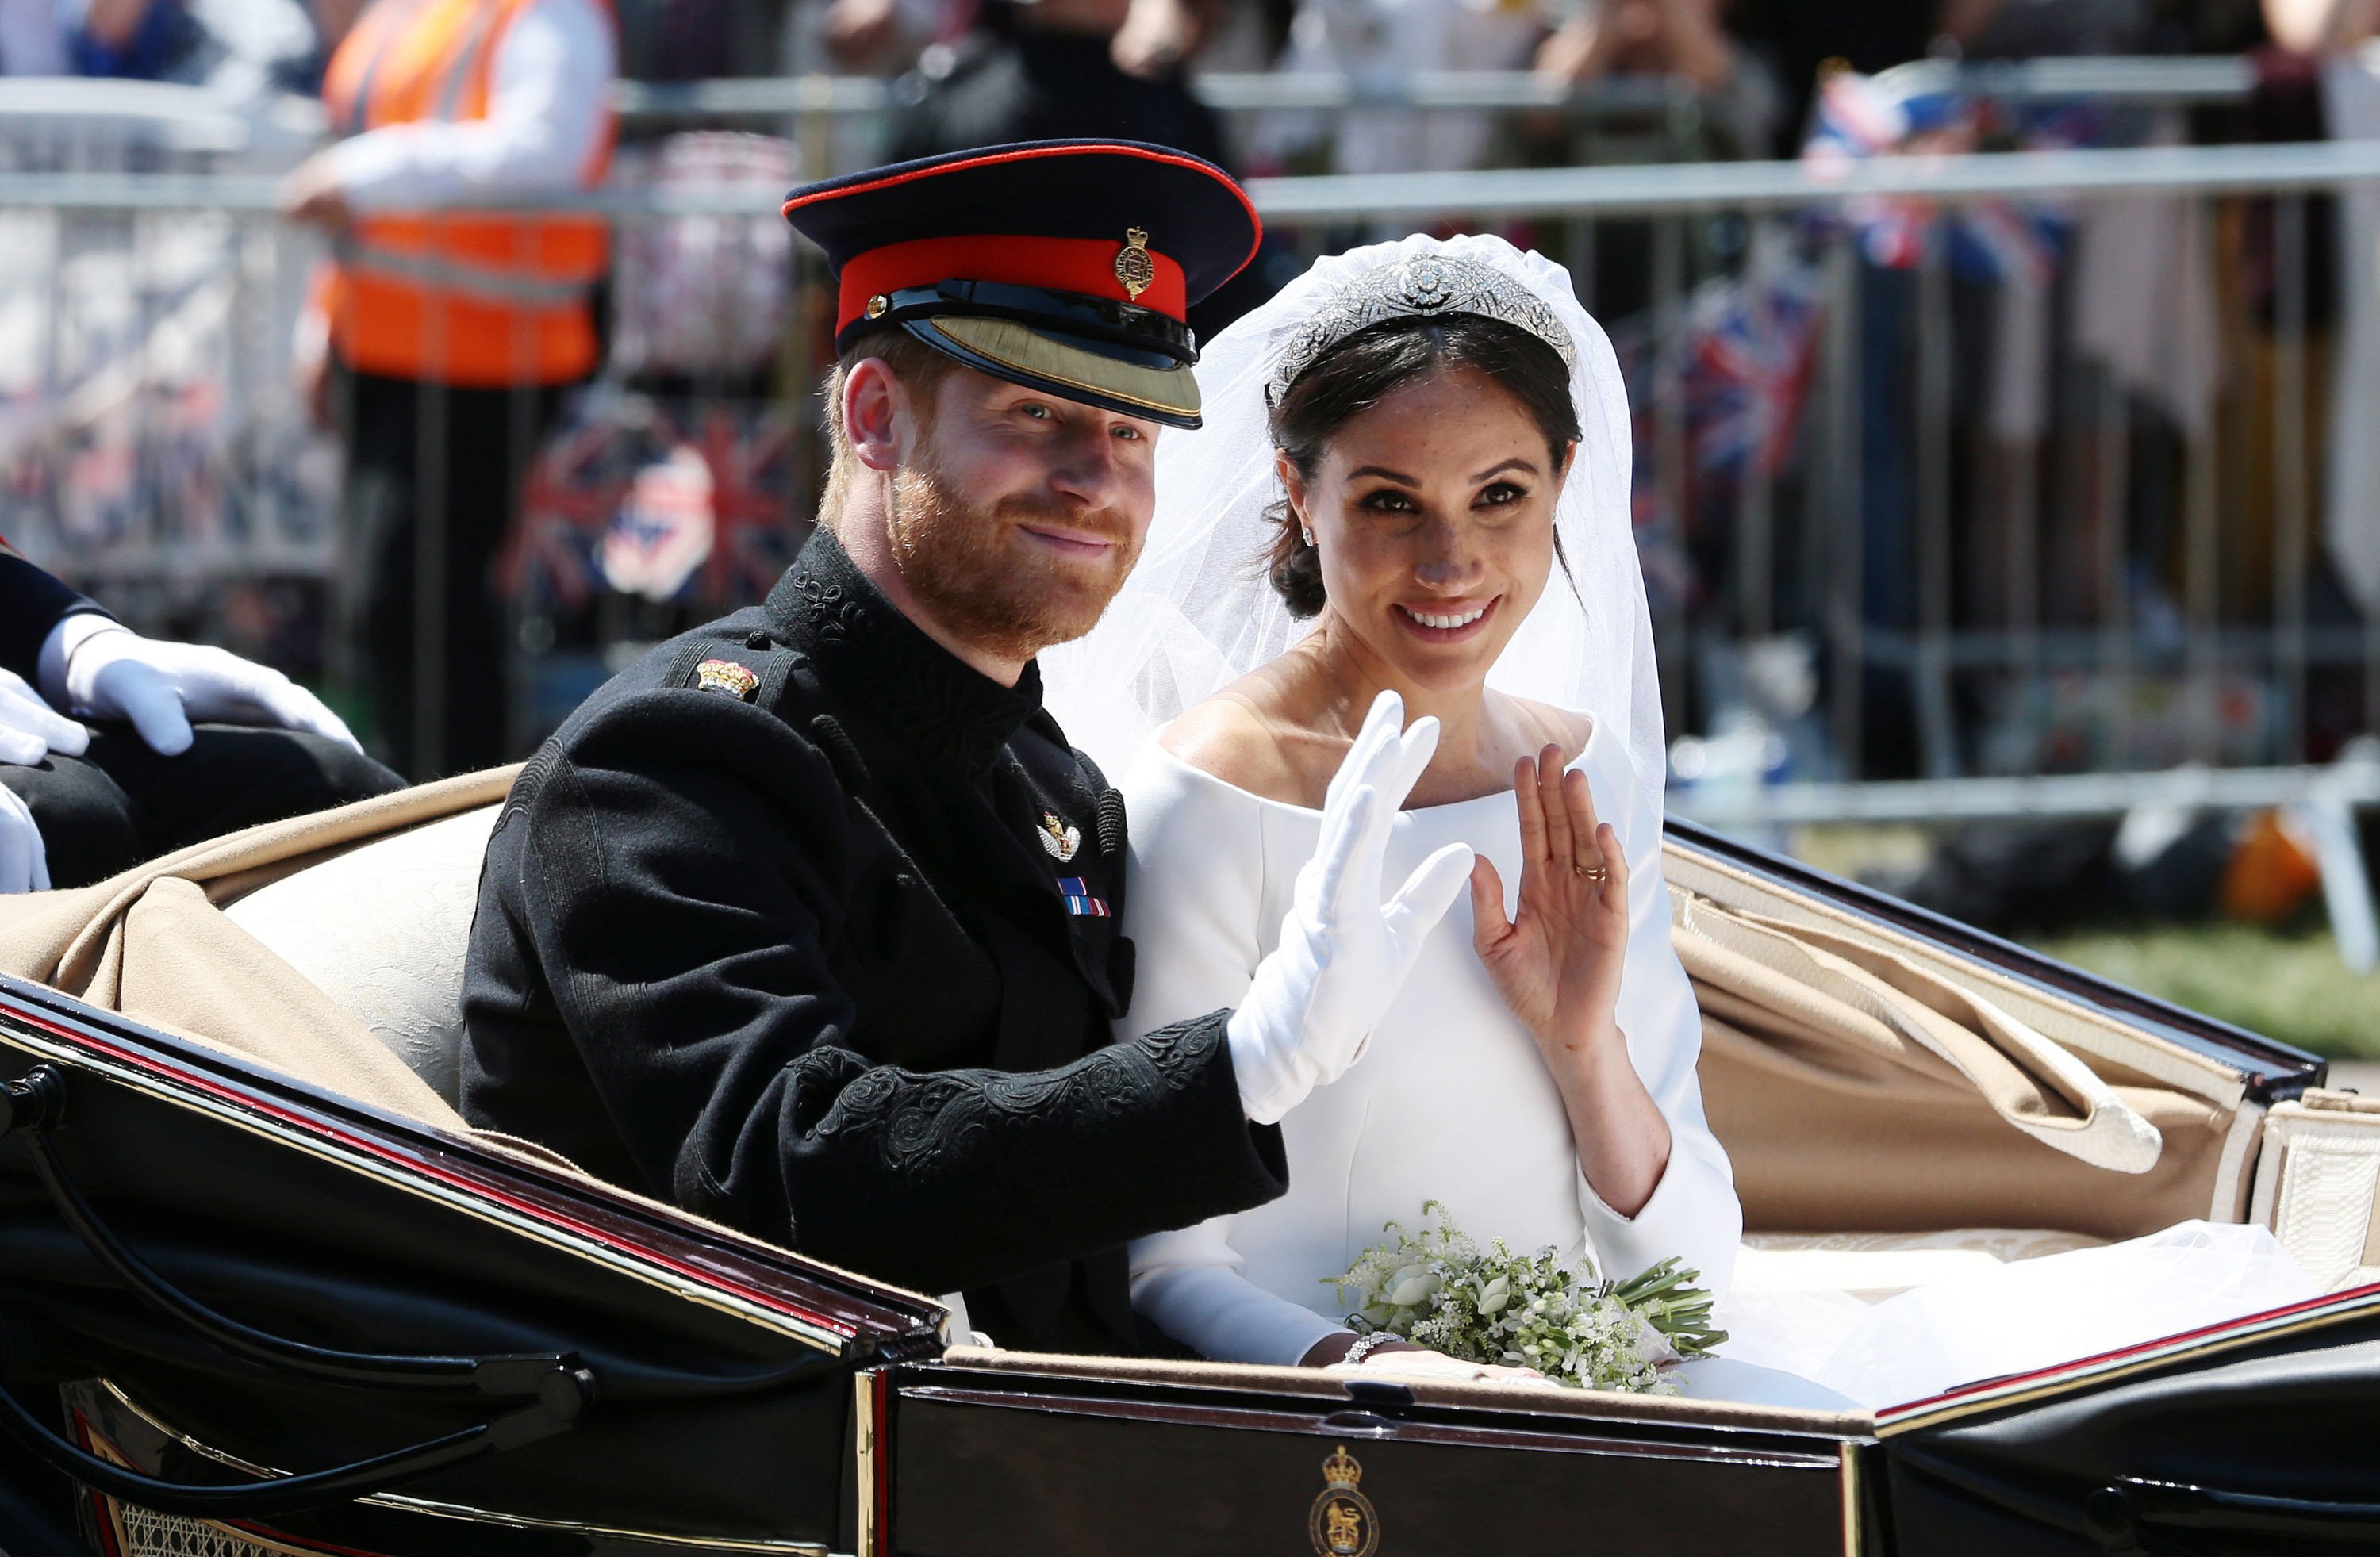 Prince Harry and Meghan Markle ride in a carriage on their wedding day.